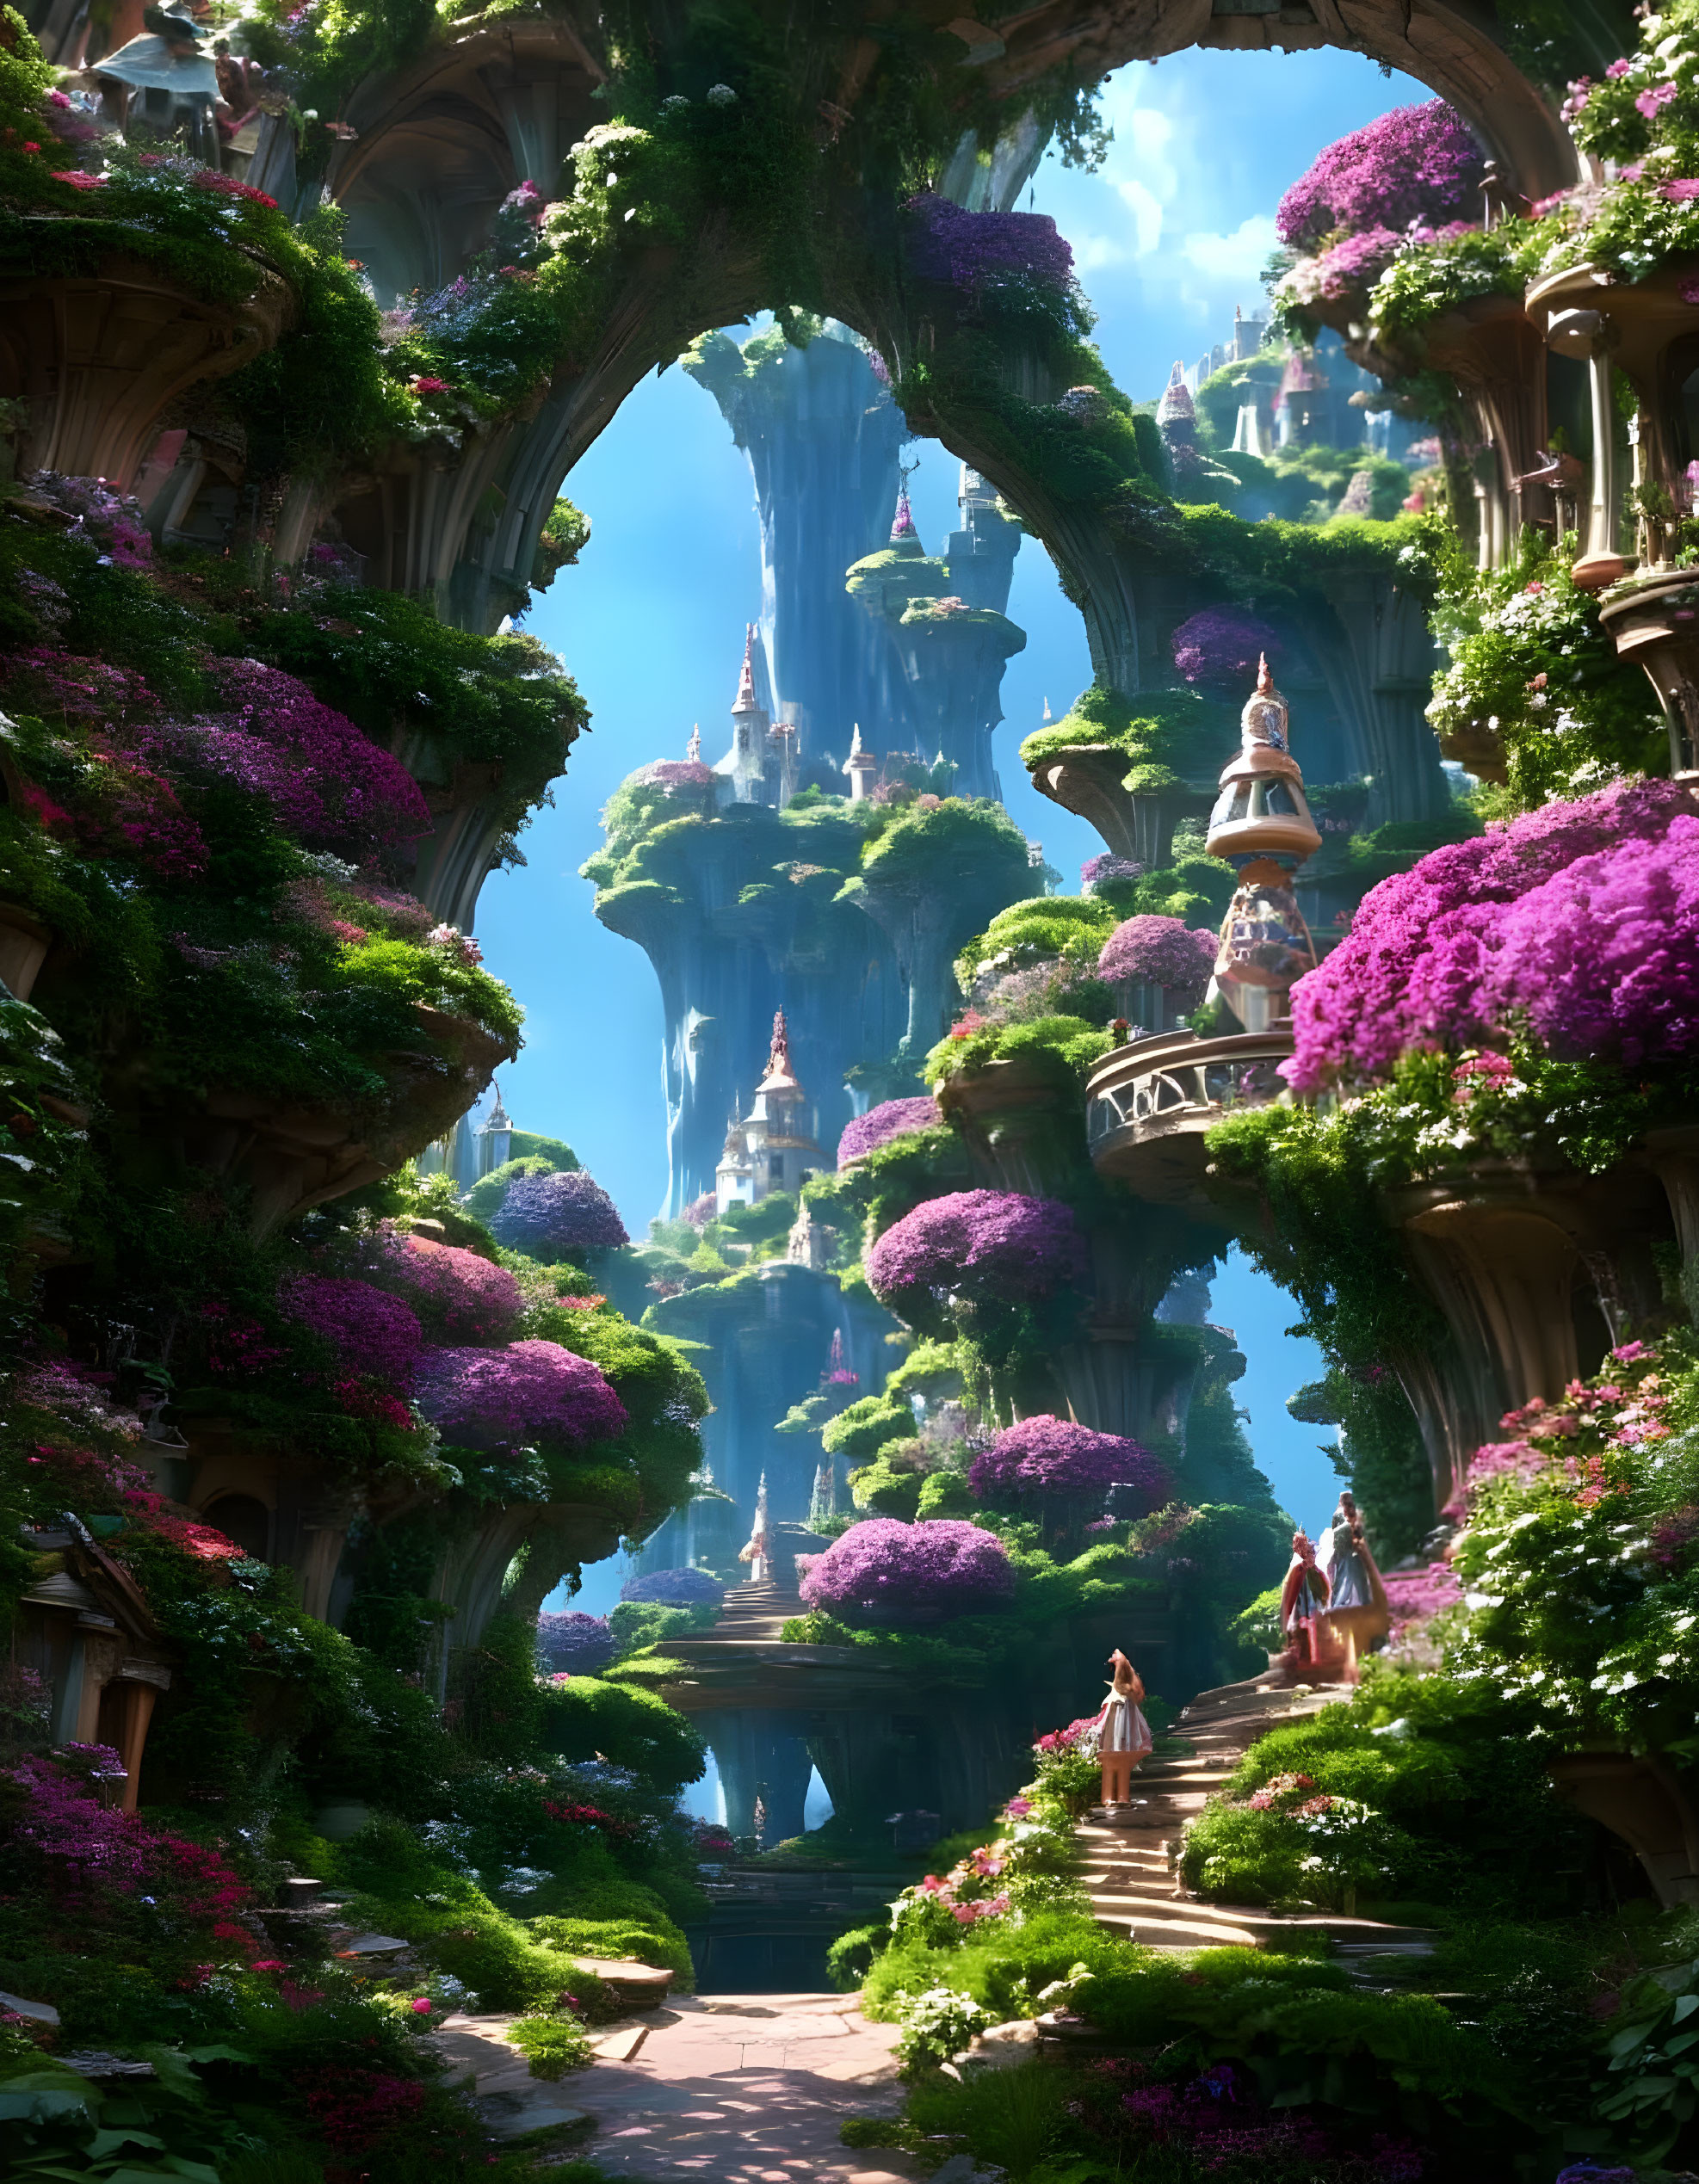 Fantastical landscape with lush greenery, purple trees, intricate architecture, and a towering castle.